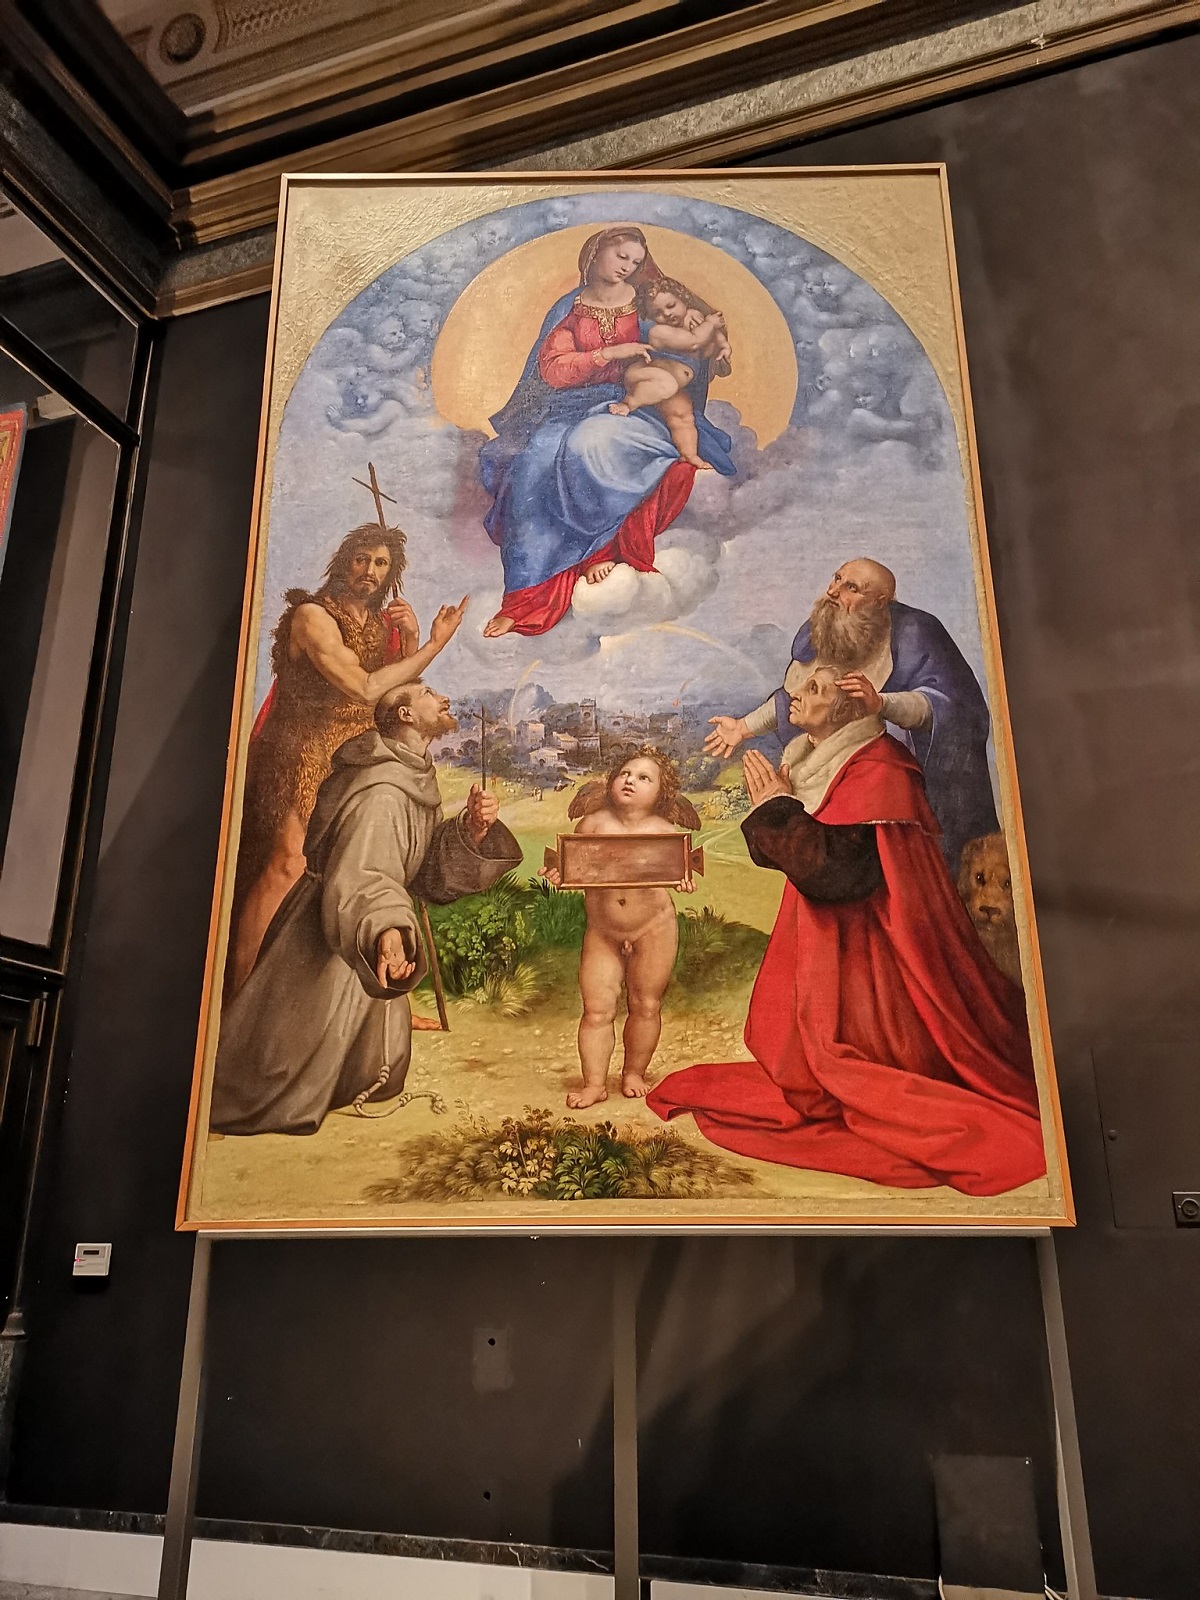 Painting of a religious scene at the Vatican museums in Rome